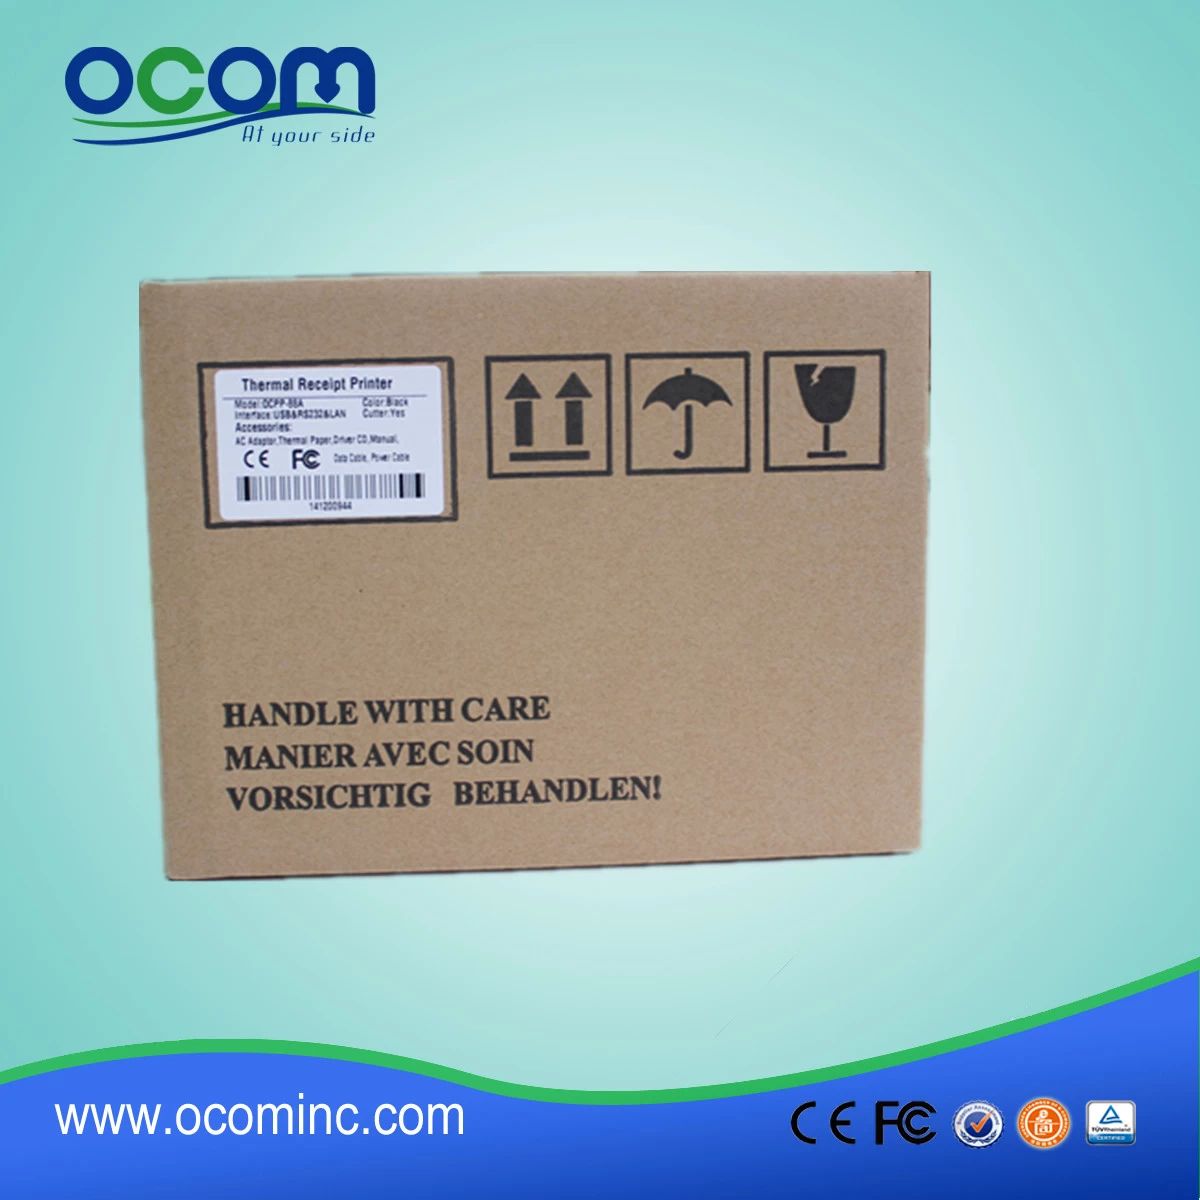 Lowest and Unique 80mm Thermal Printer OCPP-88A